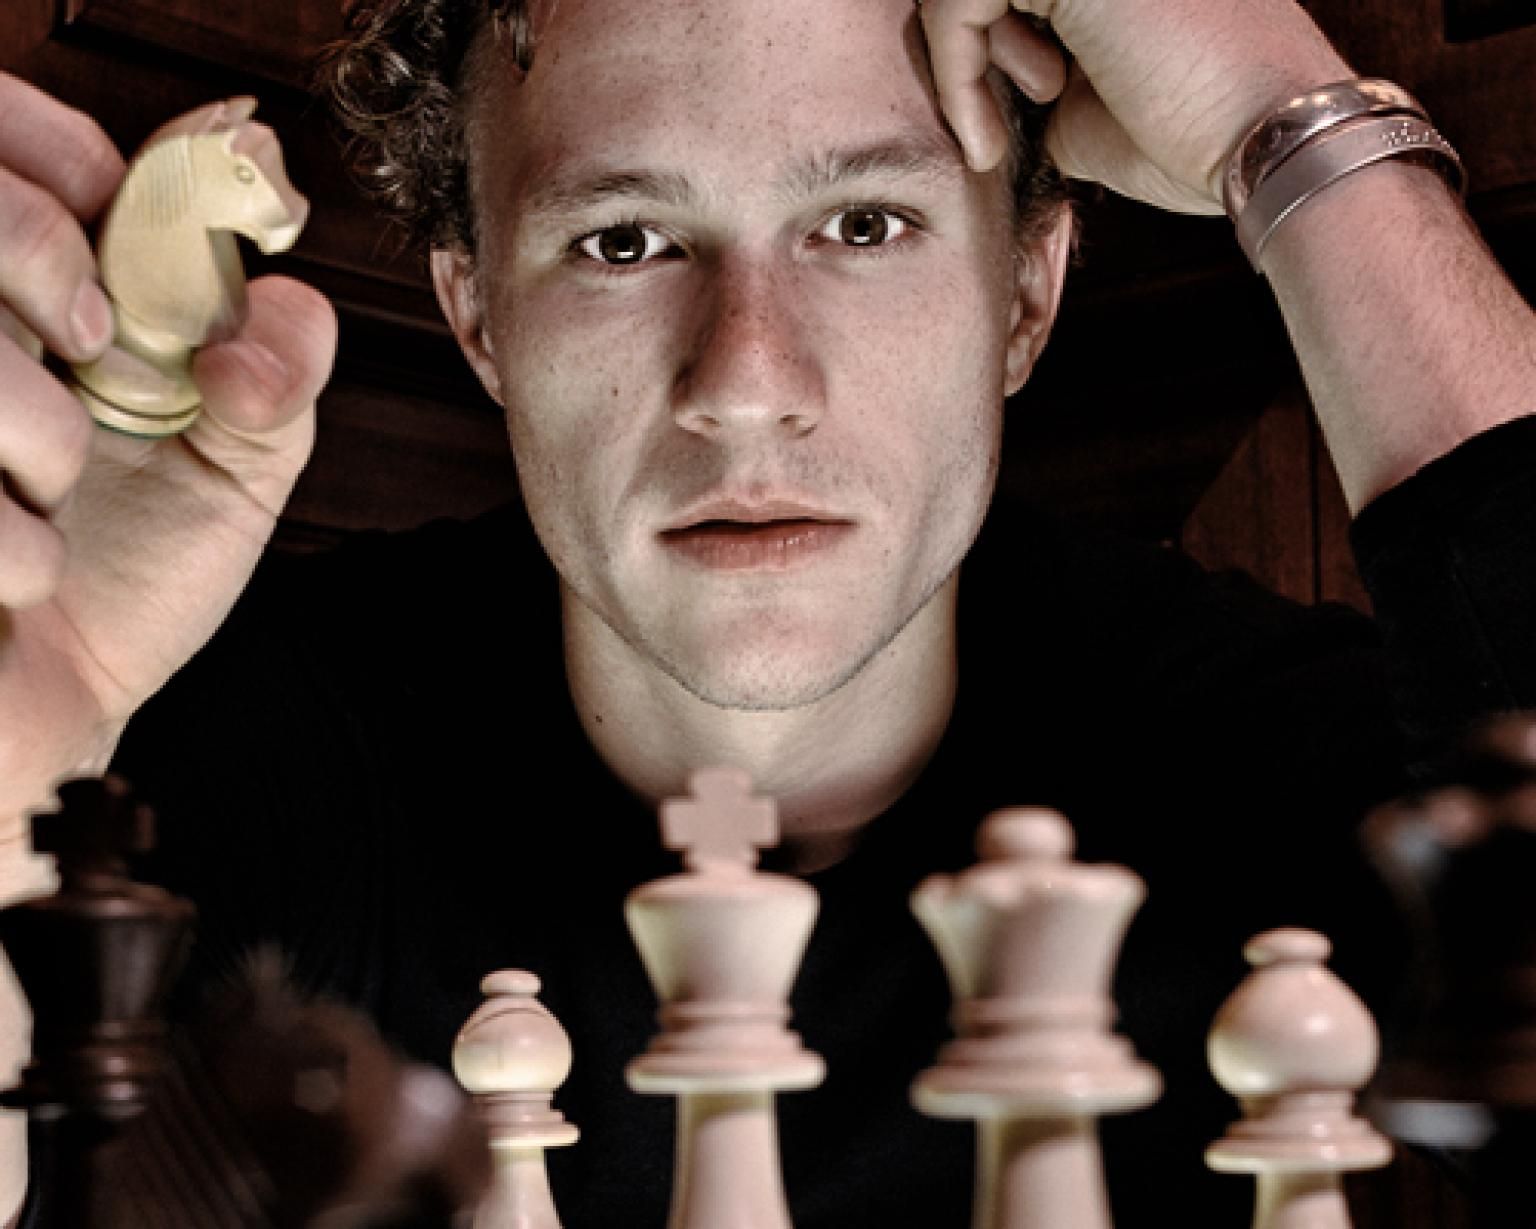 Ledger playing chess.